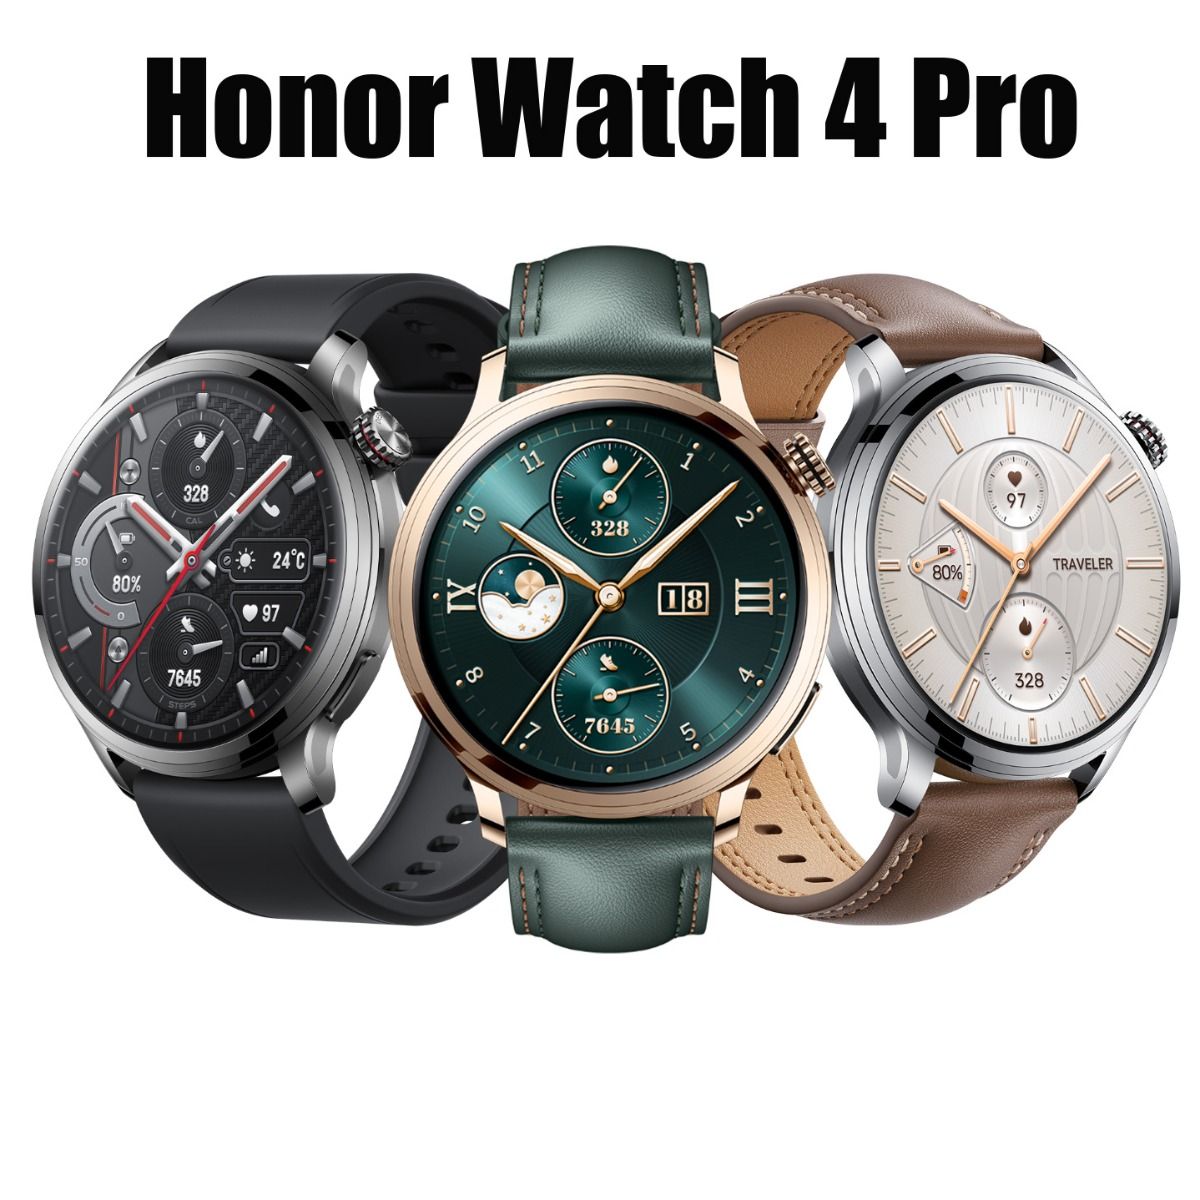 Honor Watch 4 Price in India, Full Specifications, Features - Gizbot